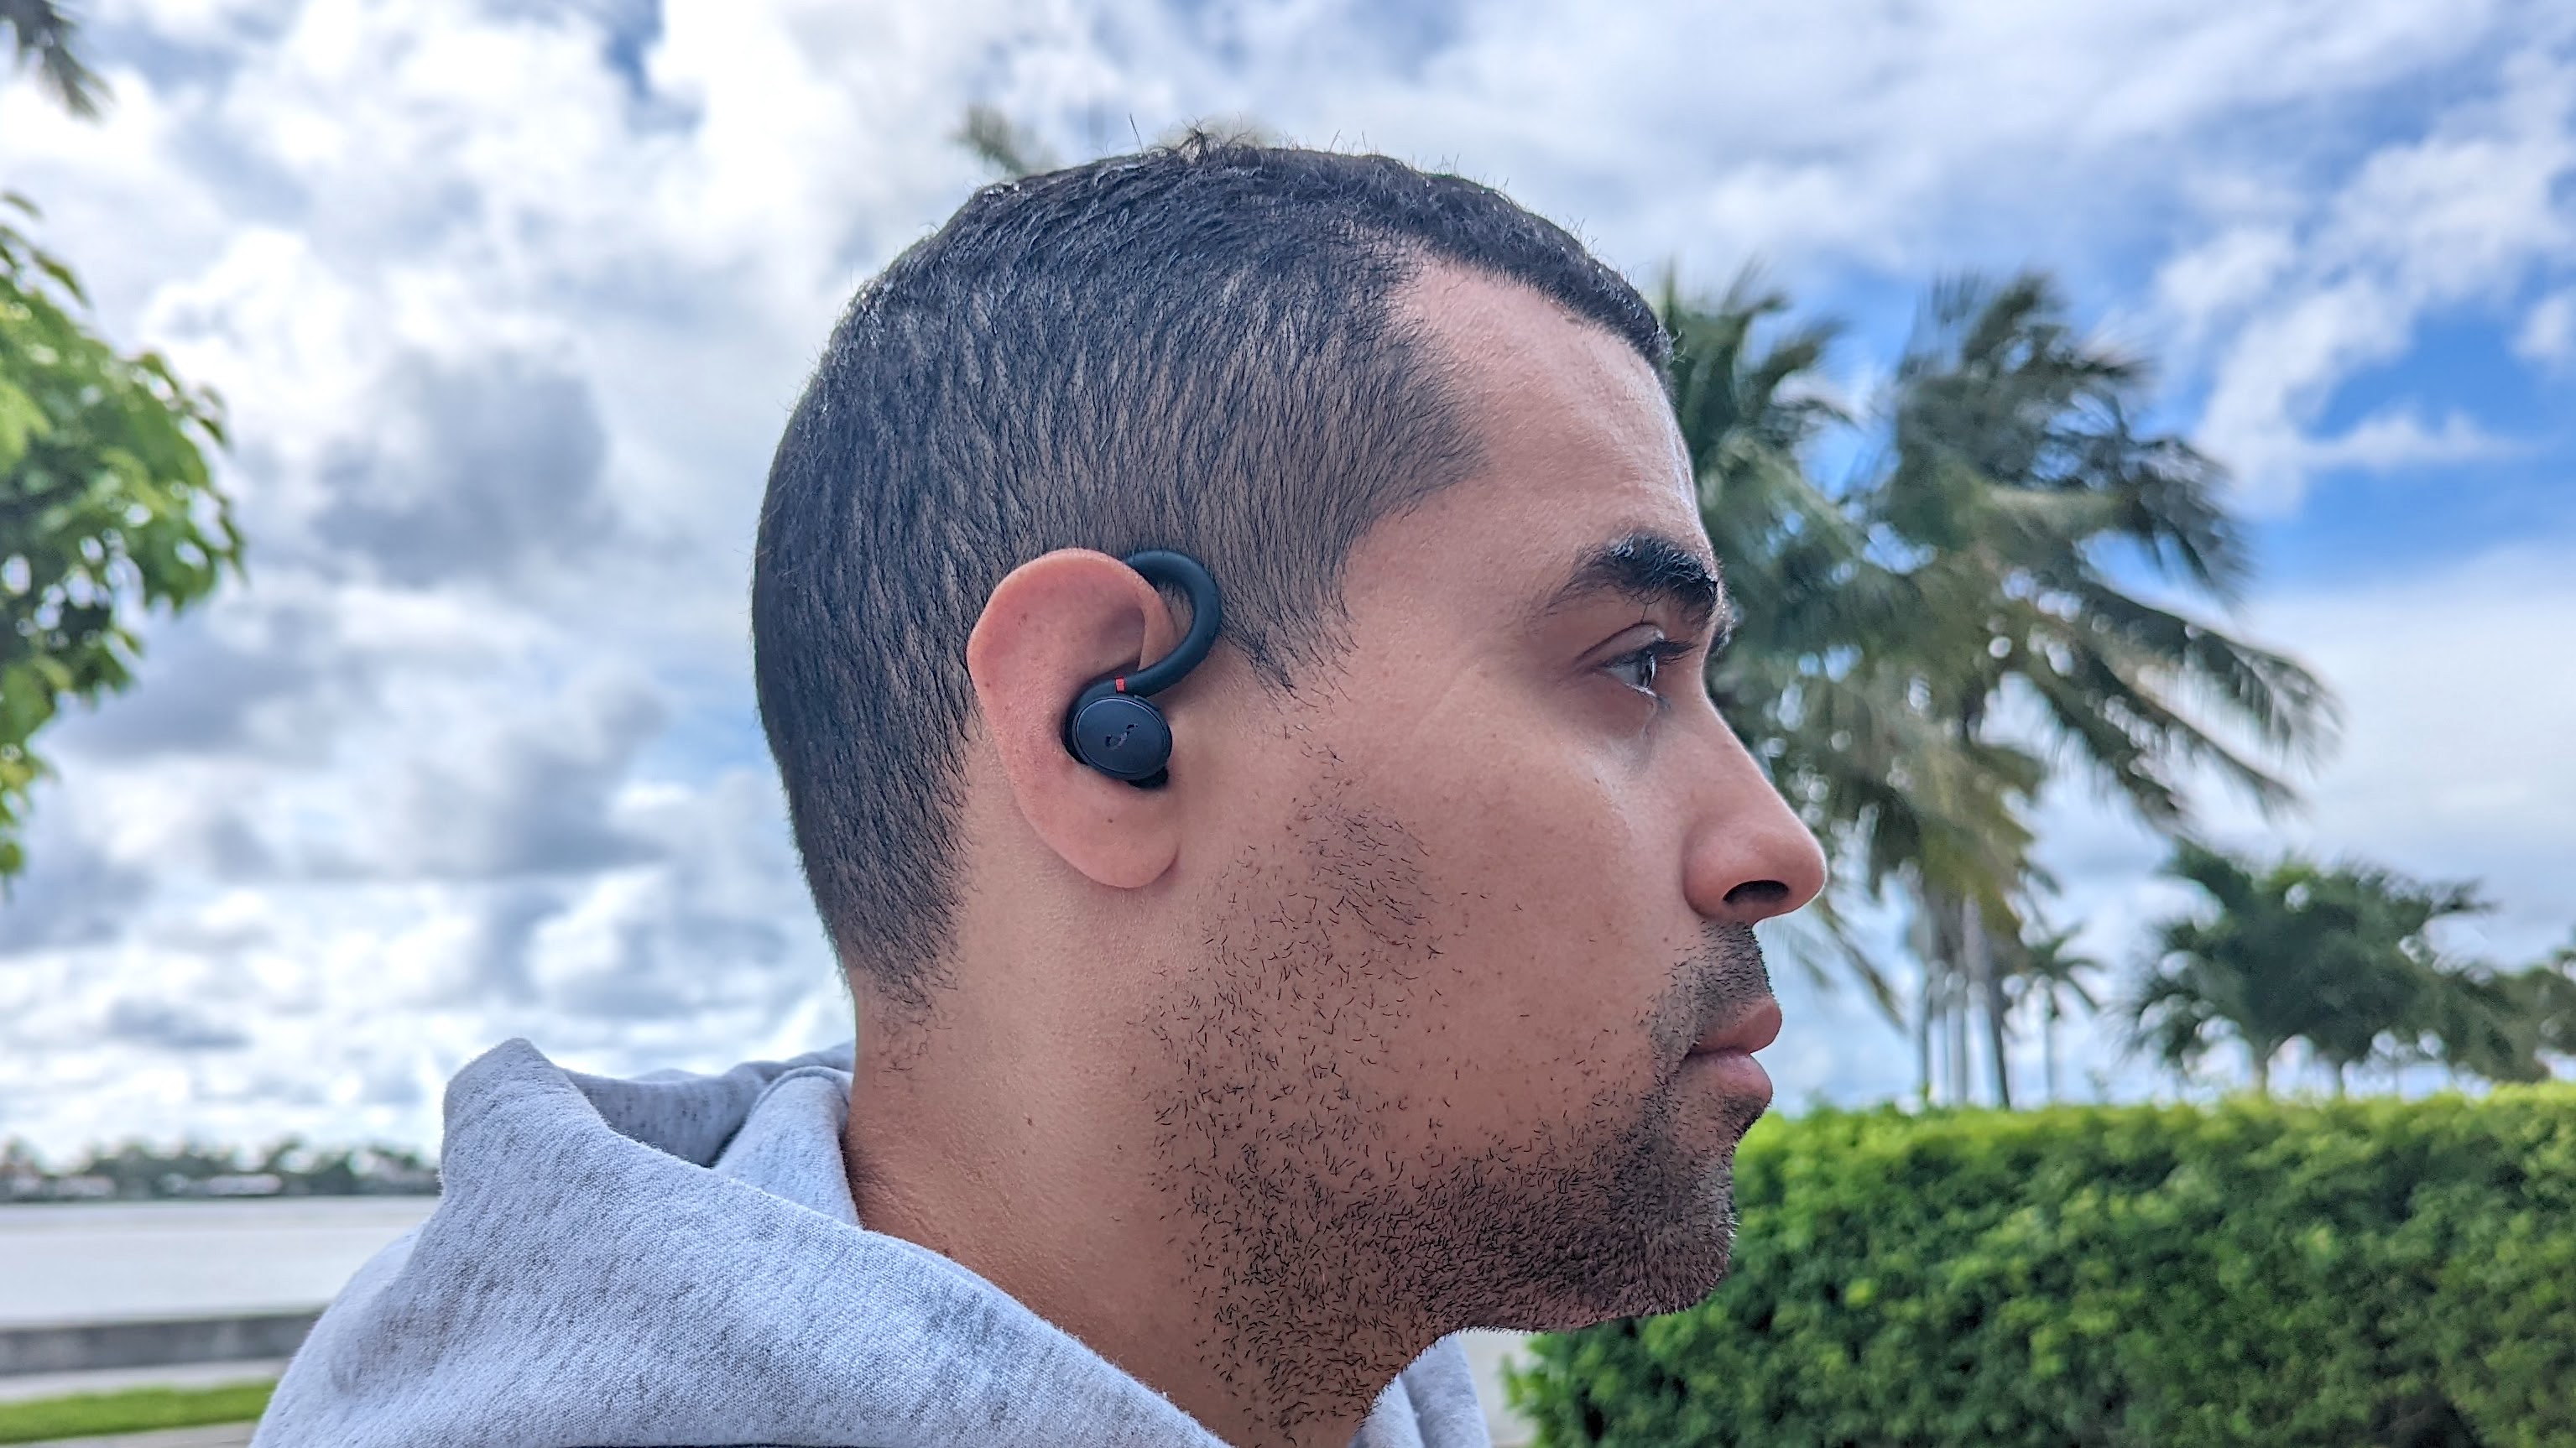 Our reviewing wearing the Anker Soundcore Sport X10 wireless earbuds before a run